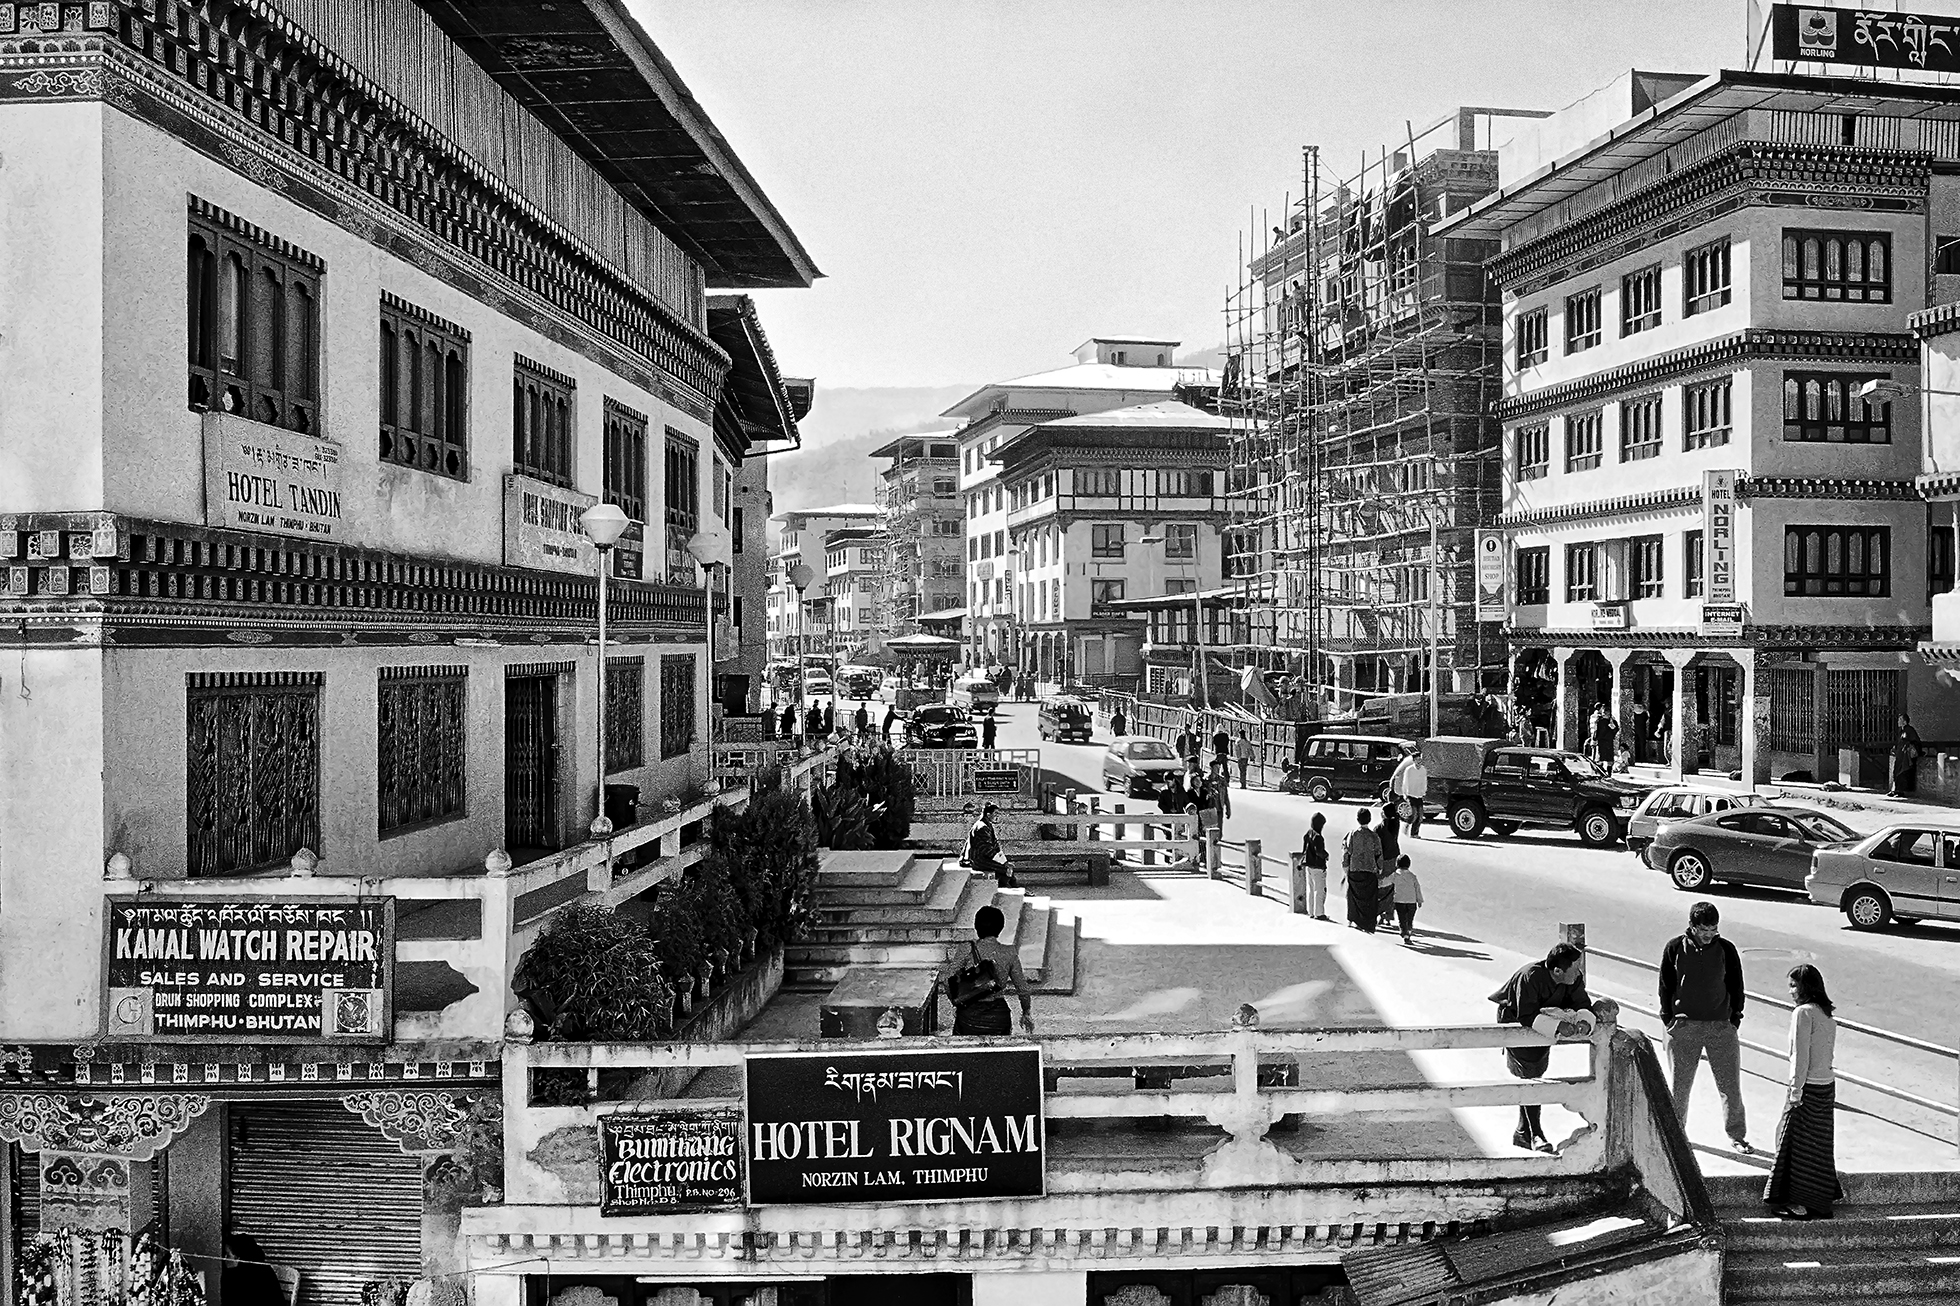 The Thimphu commercial district in Bhutan.